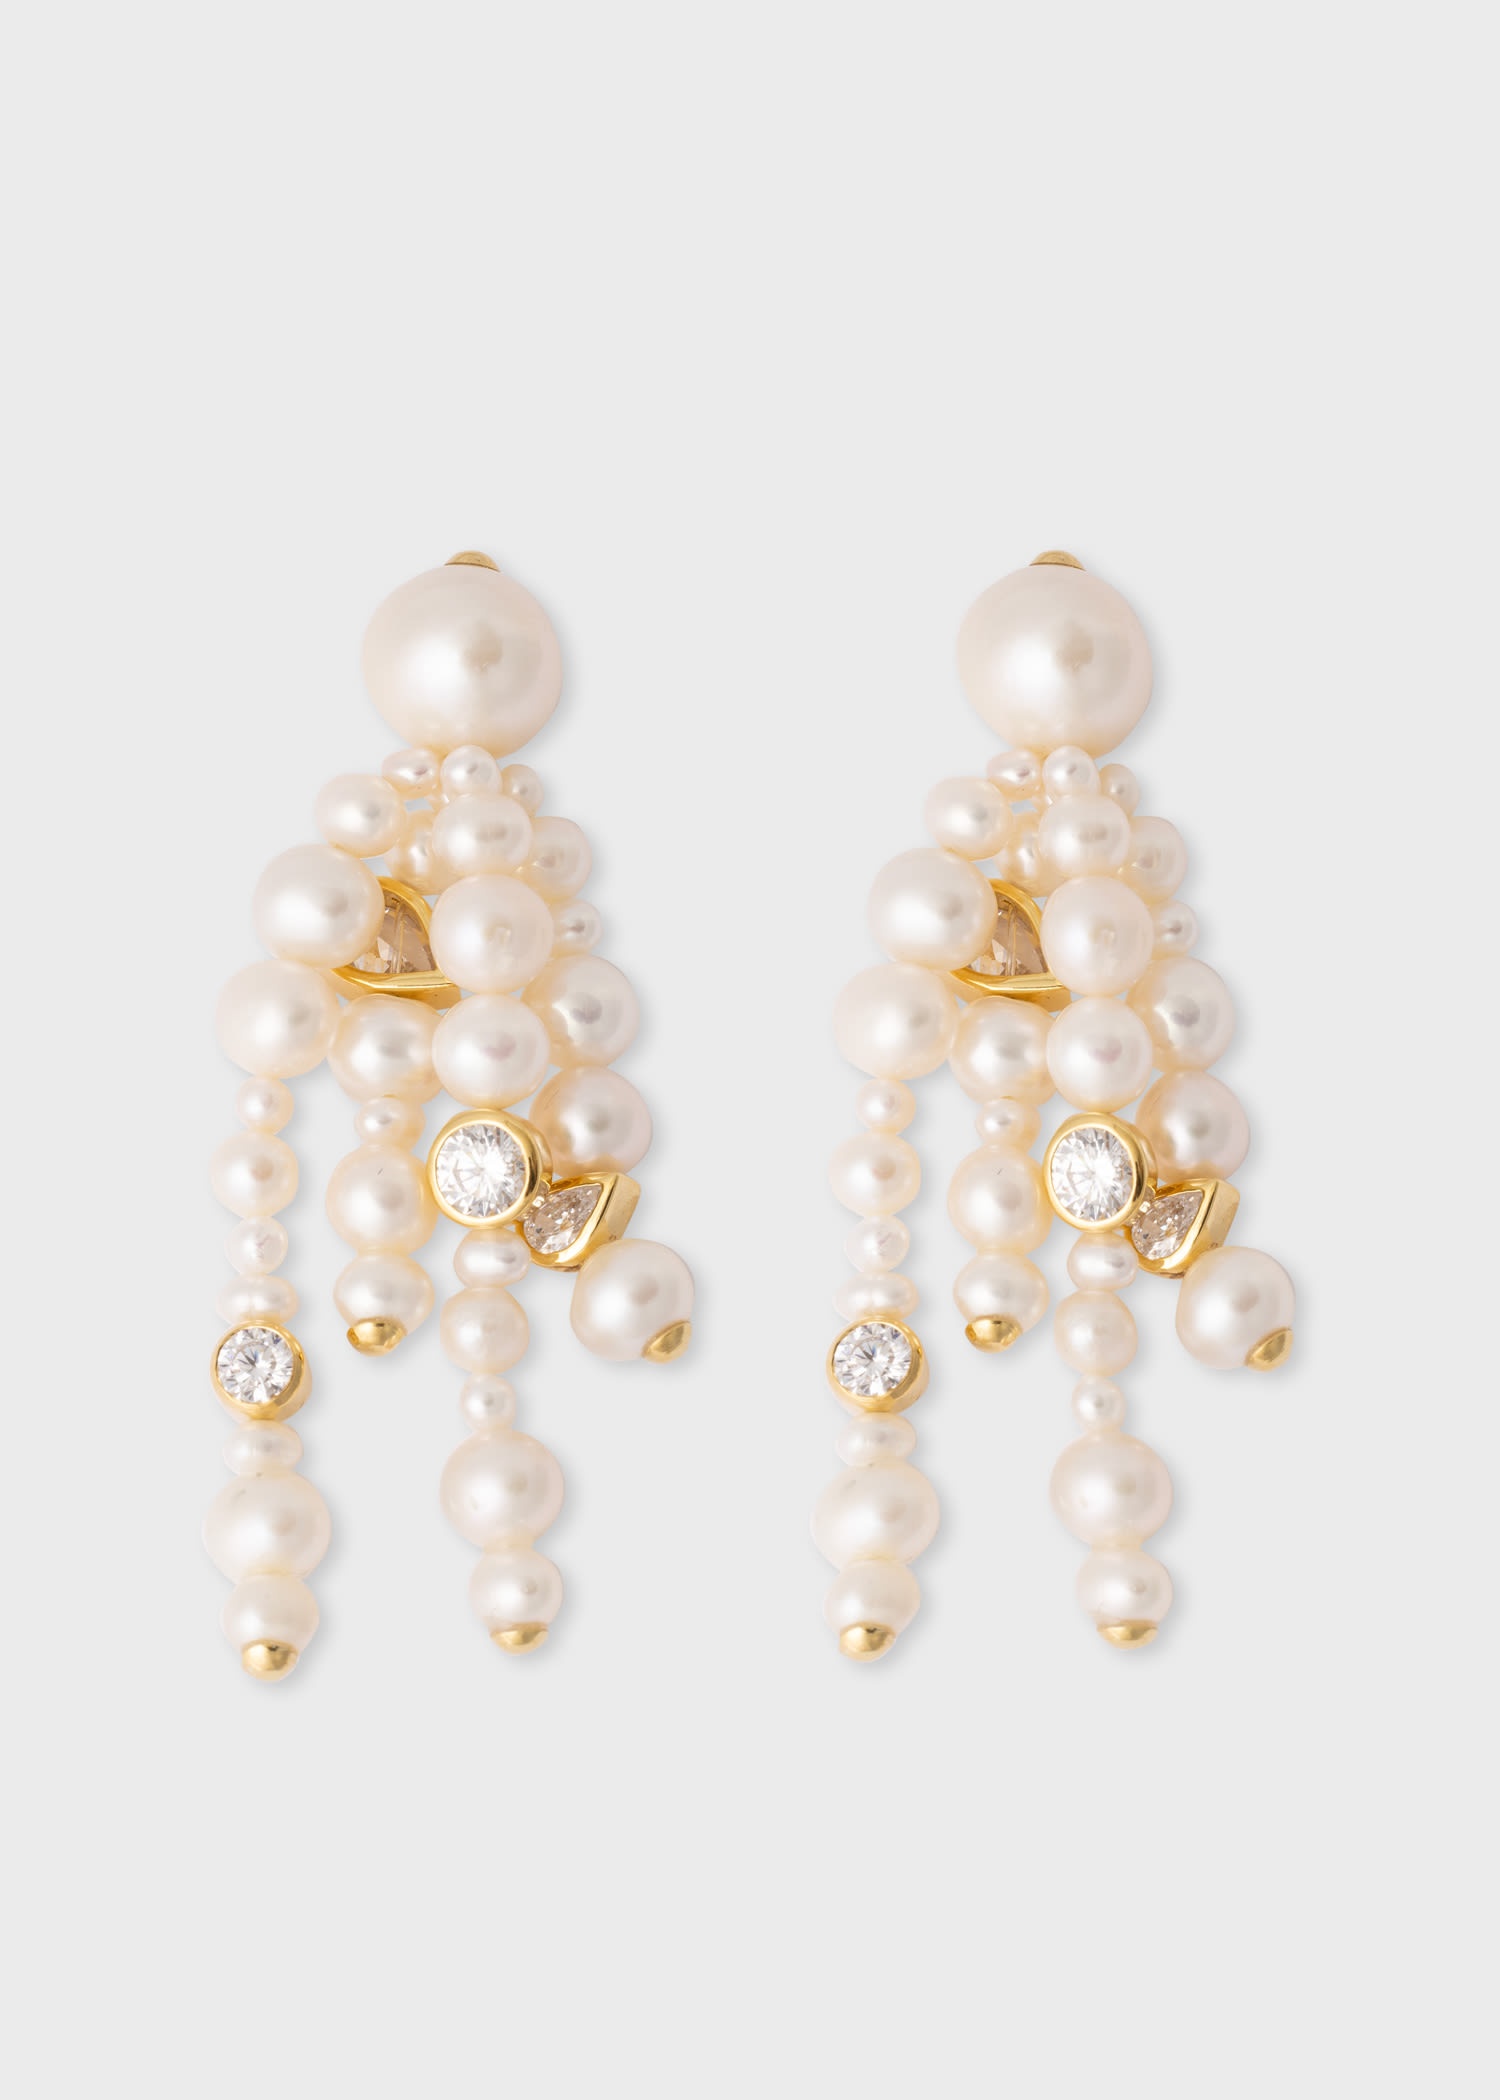 Pearl and Zirconia Gold Vermeil Earrings by Completedworks - 1